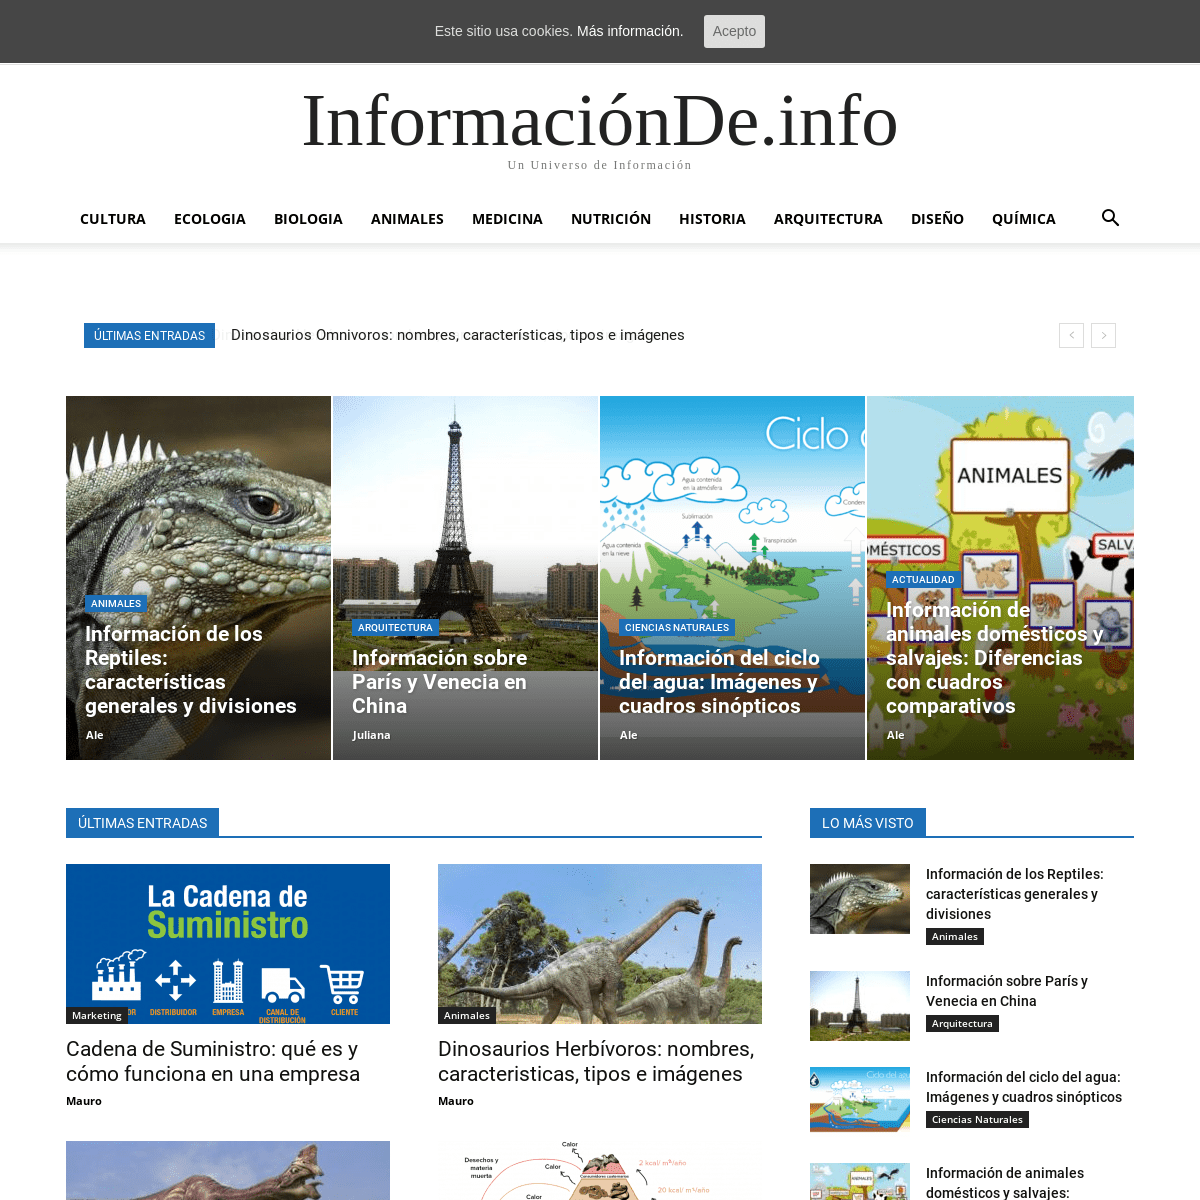 A complete backup of informacionde.info